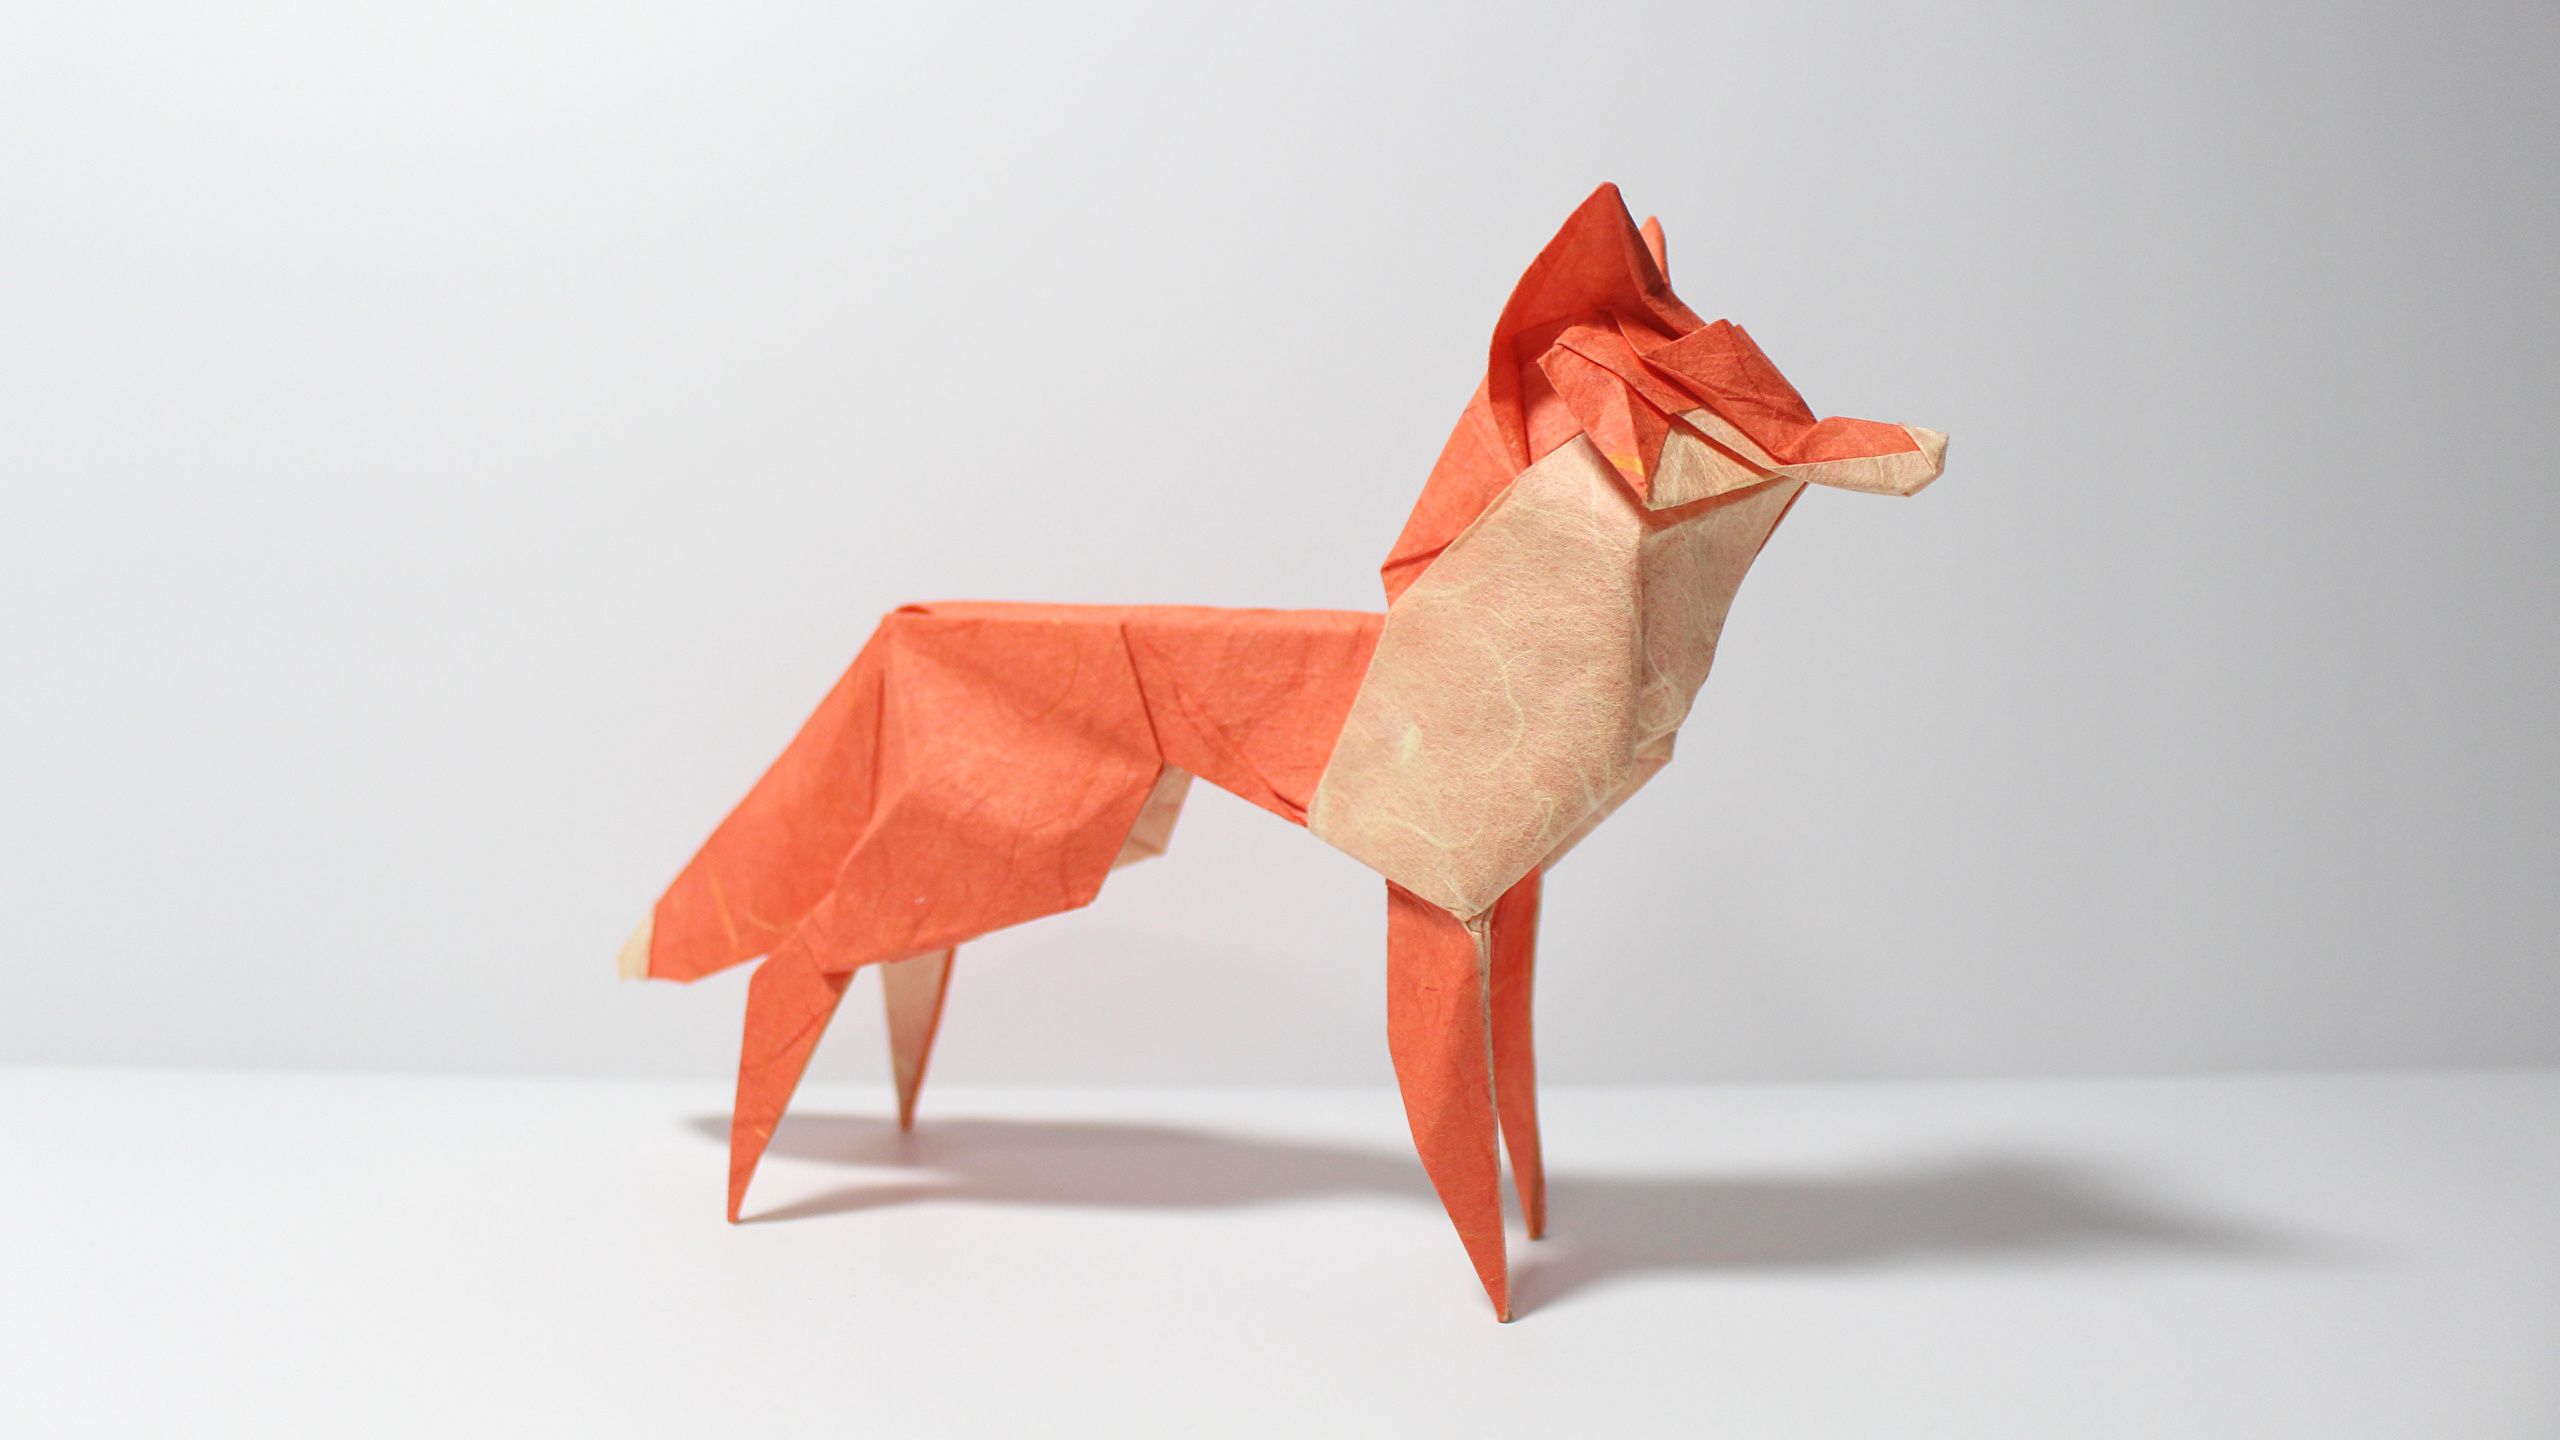 Wallpaper Foxes Origami Paper animal Gray background 2560x1440